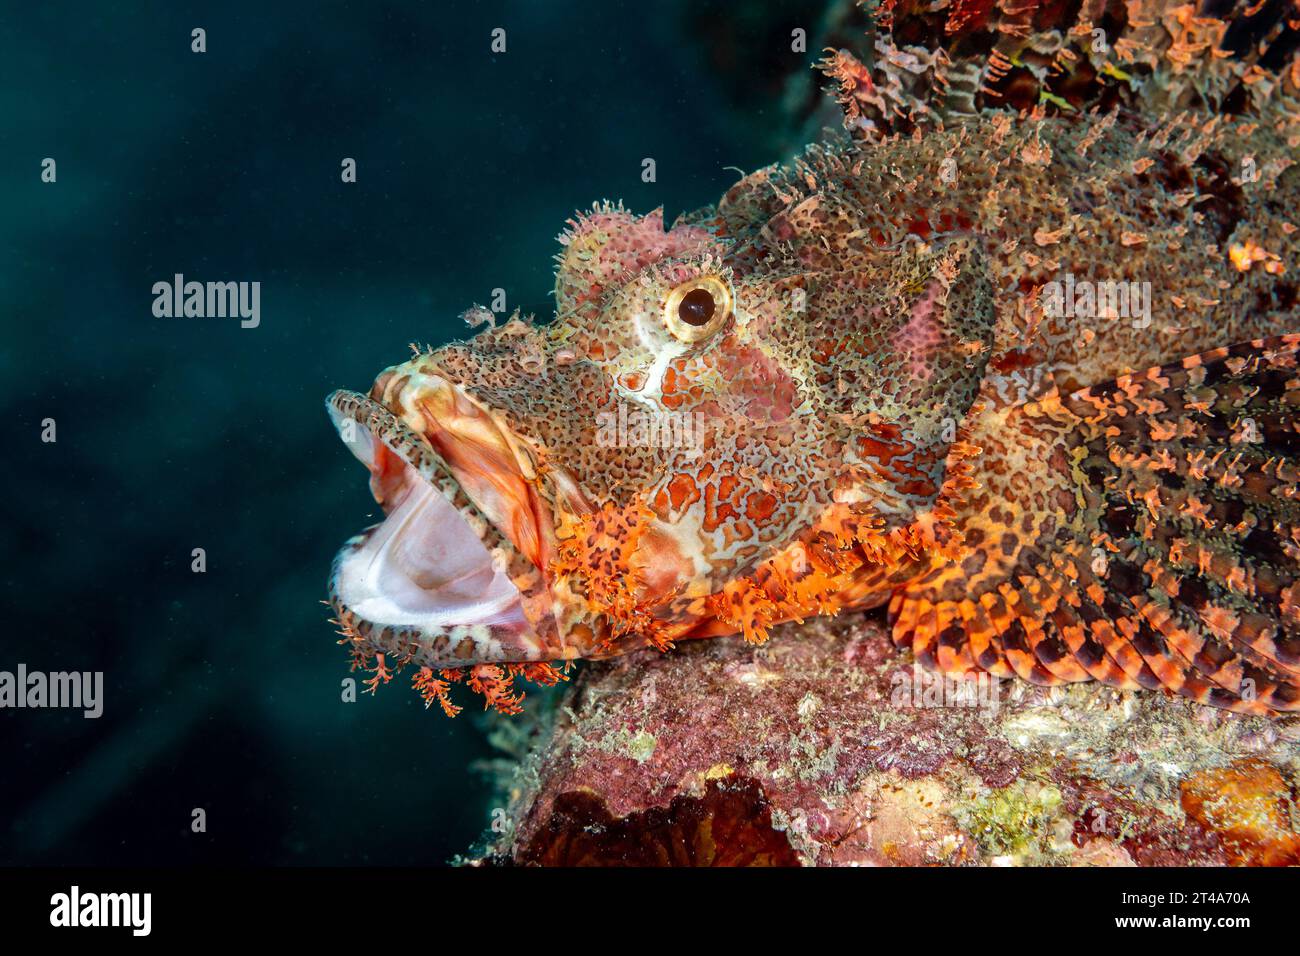 Venomous scorpion fish, Scorpaenidae, with ornate camouflage rests open mouthed on coral reef Stock Photo